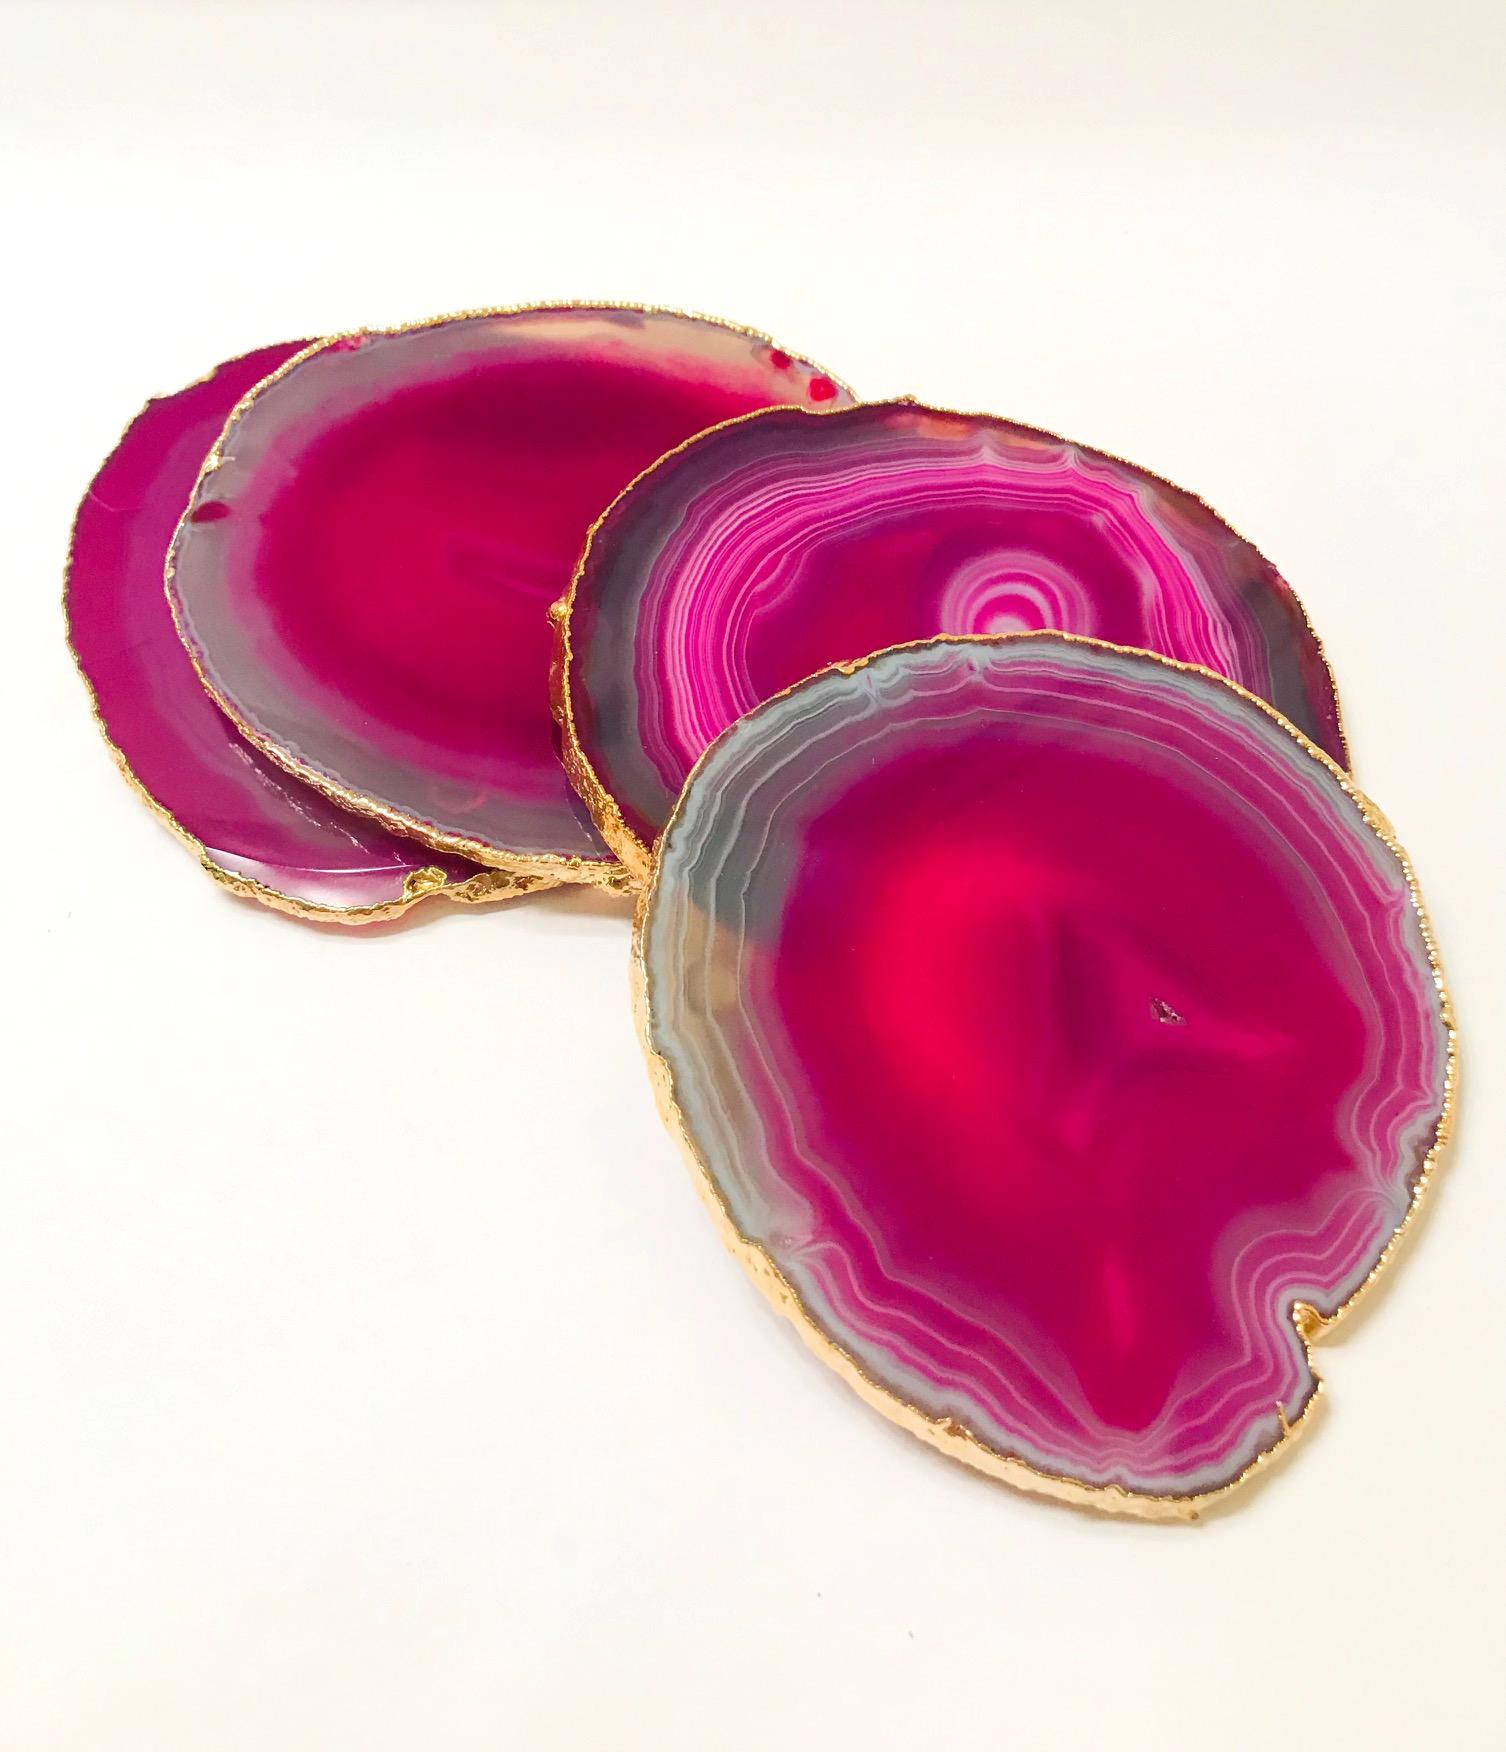 Organic modern agate and crystal coasters in gradient hot pink with grey and taupe accents. The set features polished fronts with natural rough edges with 24-karat gold-plated finish. No two pieces are alike. Make beautiful accessories to any coffee